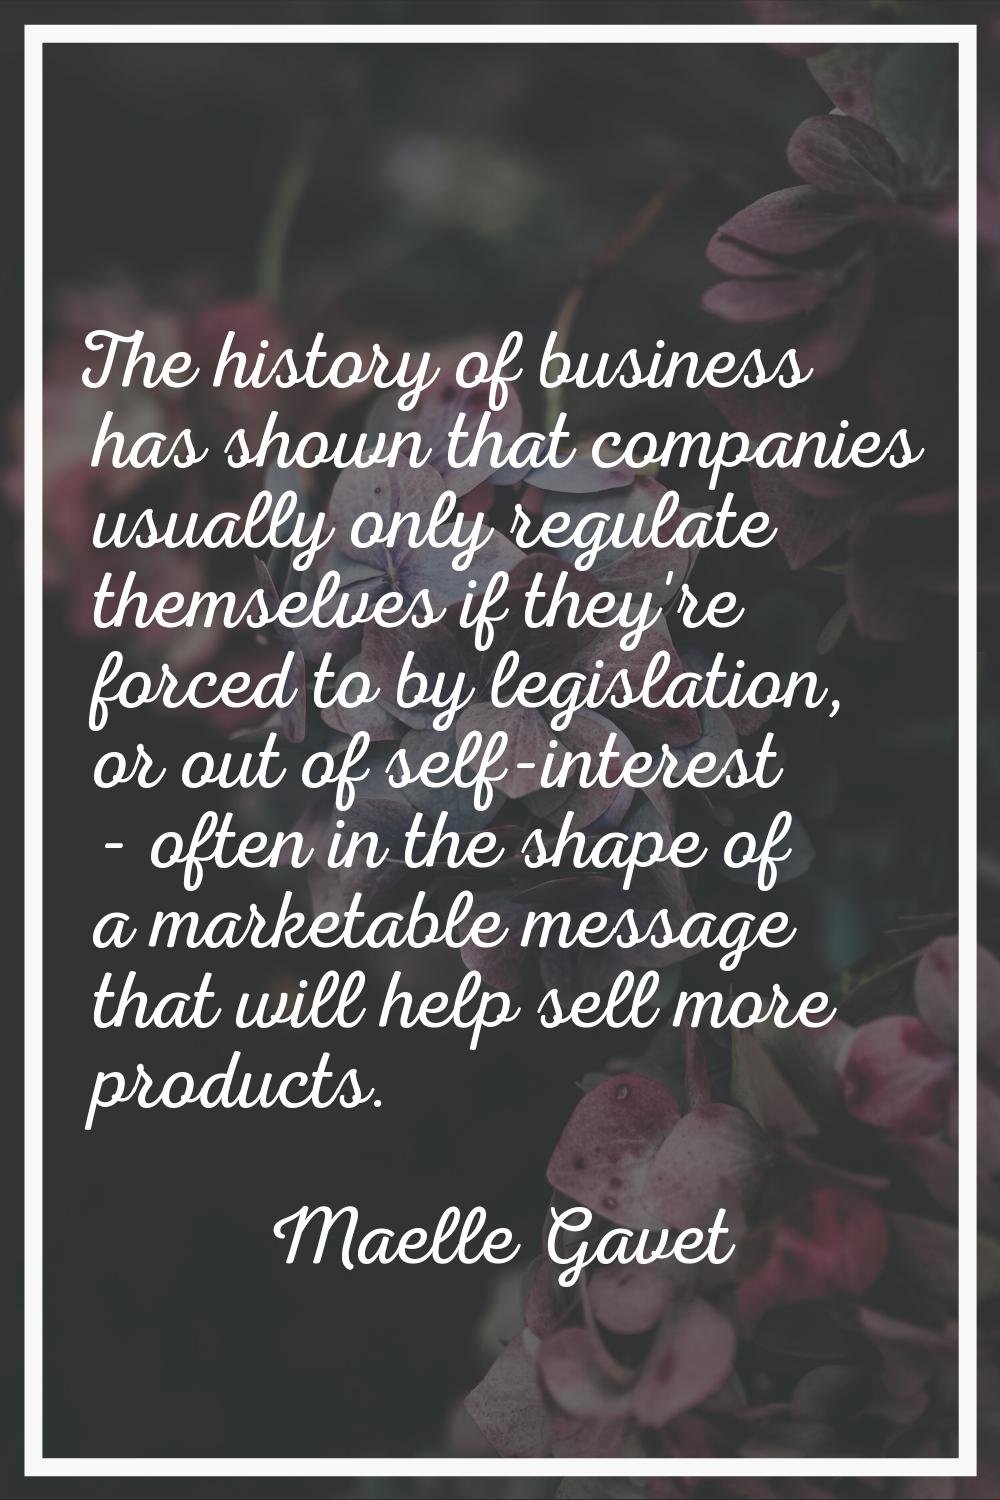 The history of business has shown that companies usually only regulate themselves if they're forced